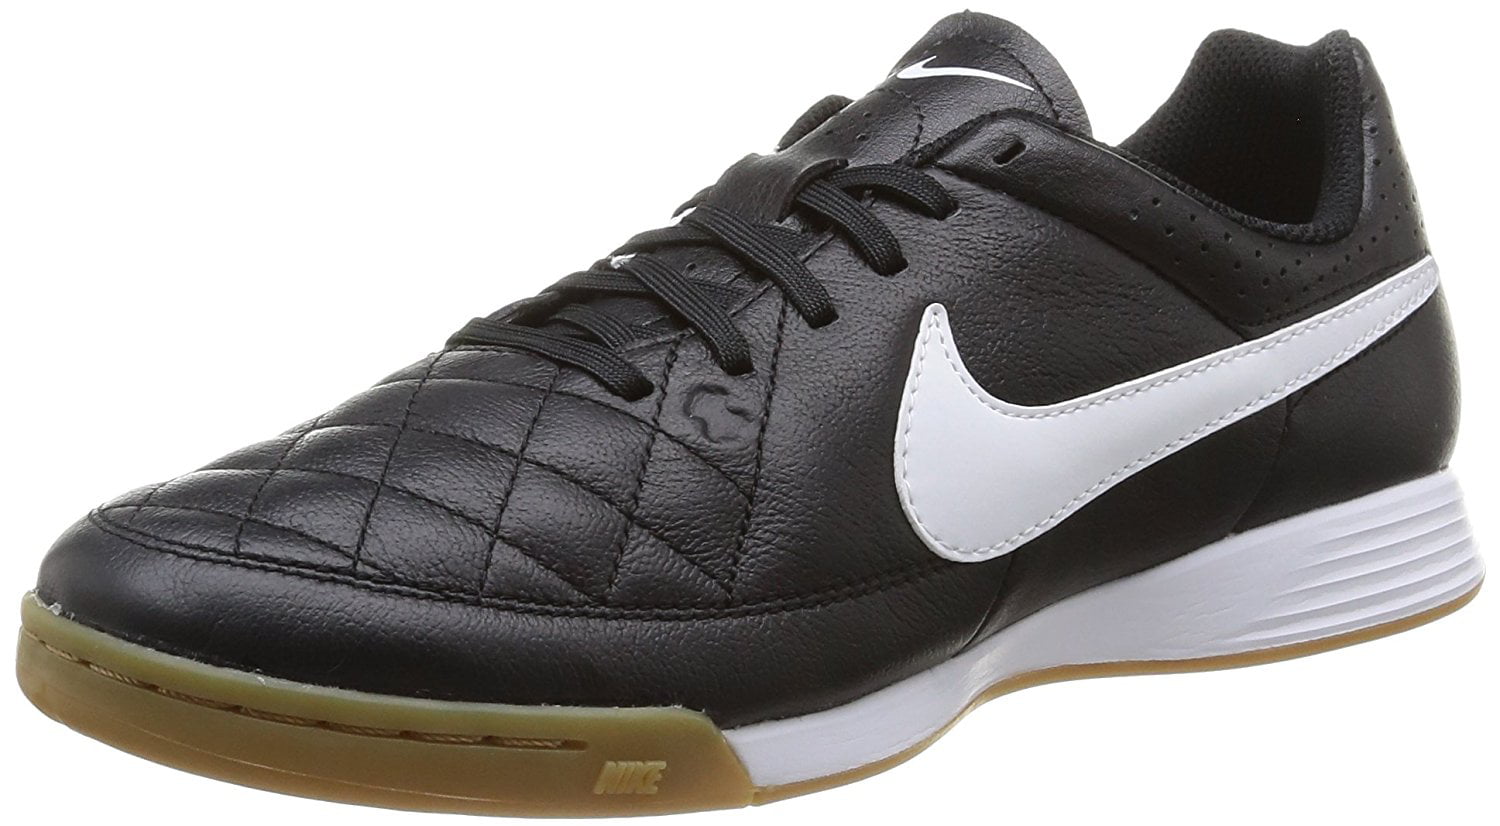 nike men's tiempo genio leather ic soccer shoes